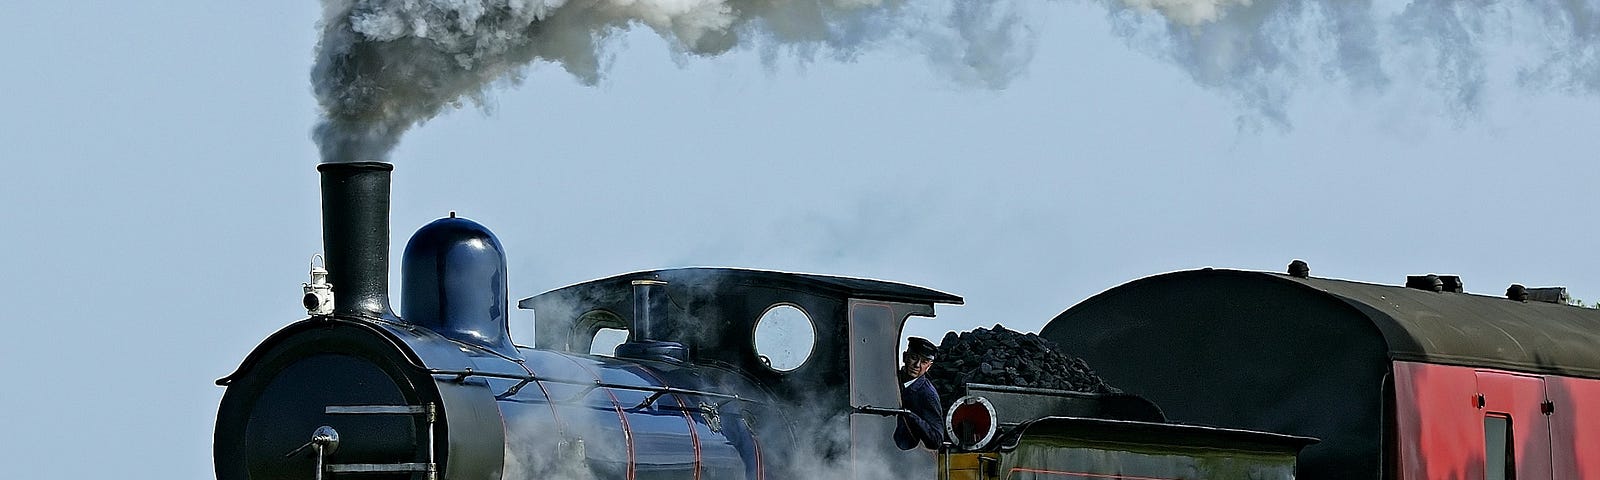 Image of a black steam train locomotive, blowing out smoke and you can see a part of the red carriage behind it.